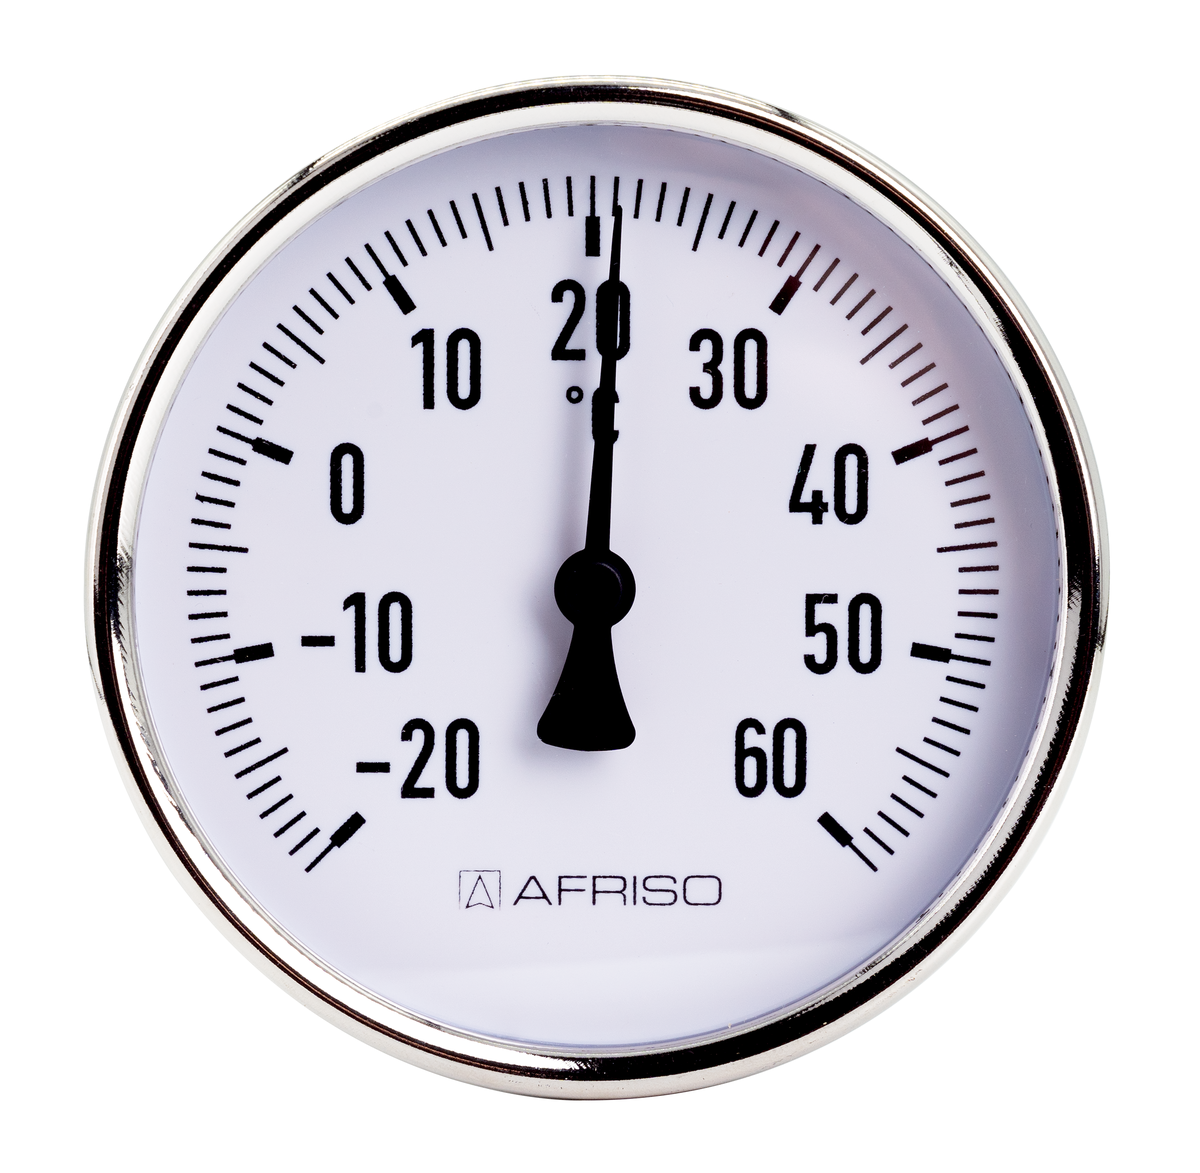 AFRISO Bimetall-Thermometer BiTh 50 ST 0/60C 40mm G1/2B axial Kl.2 VOR 88310 88320 88330 88340 88360 88370 88380 88390 88420 88430 88440 88450 88470 88480 88490 88500 88520 88530 88540 88550 88570 88580 88590 88600 88630 88640 88650 88660 88680 88690 88700 88710 88730 88740 88750 88760 88770 88790 88800 88810 88820 88850 88860 88870 88880 88900 88910 88920 88930 88950 88960 88970 88980 88990 89010 89020 89030 89040 object_image_98577imagemain_de